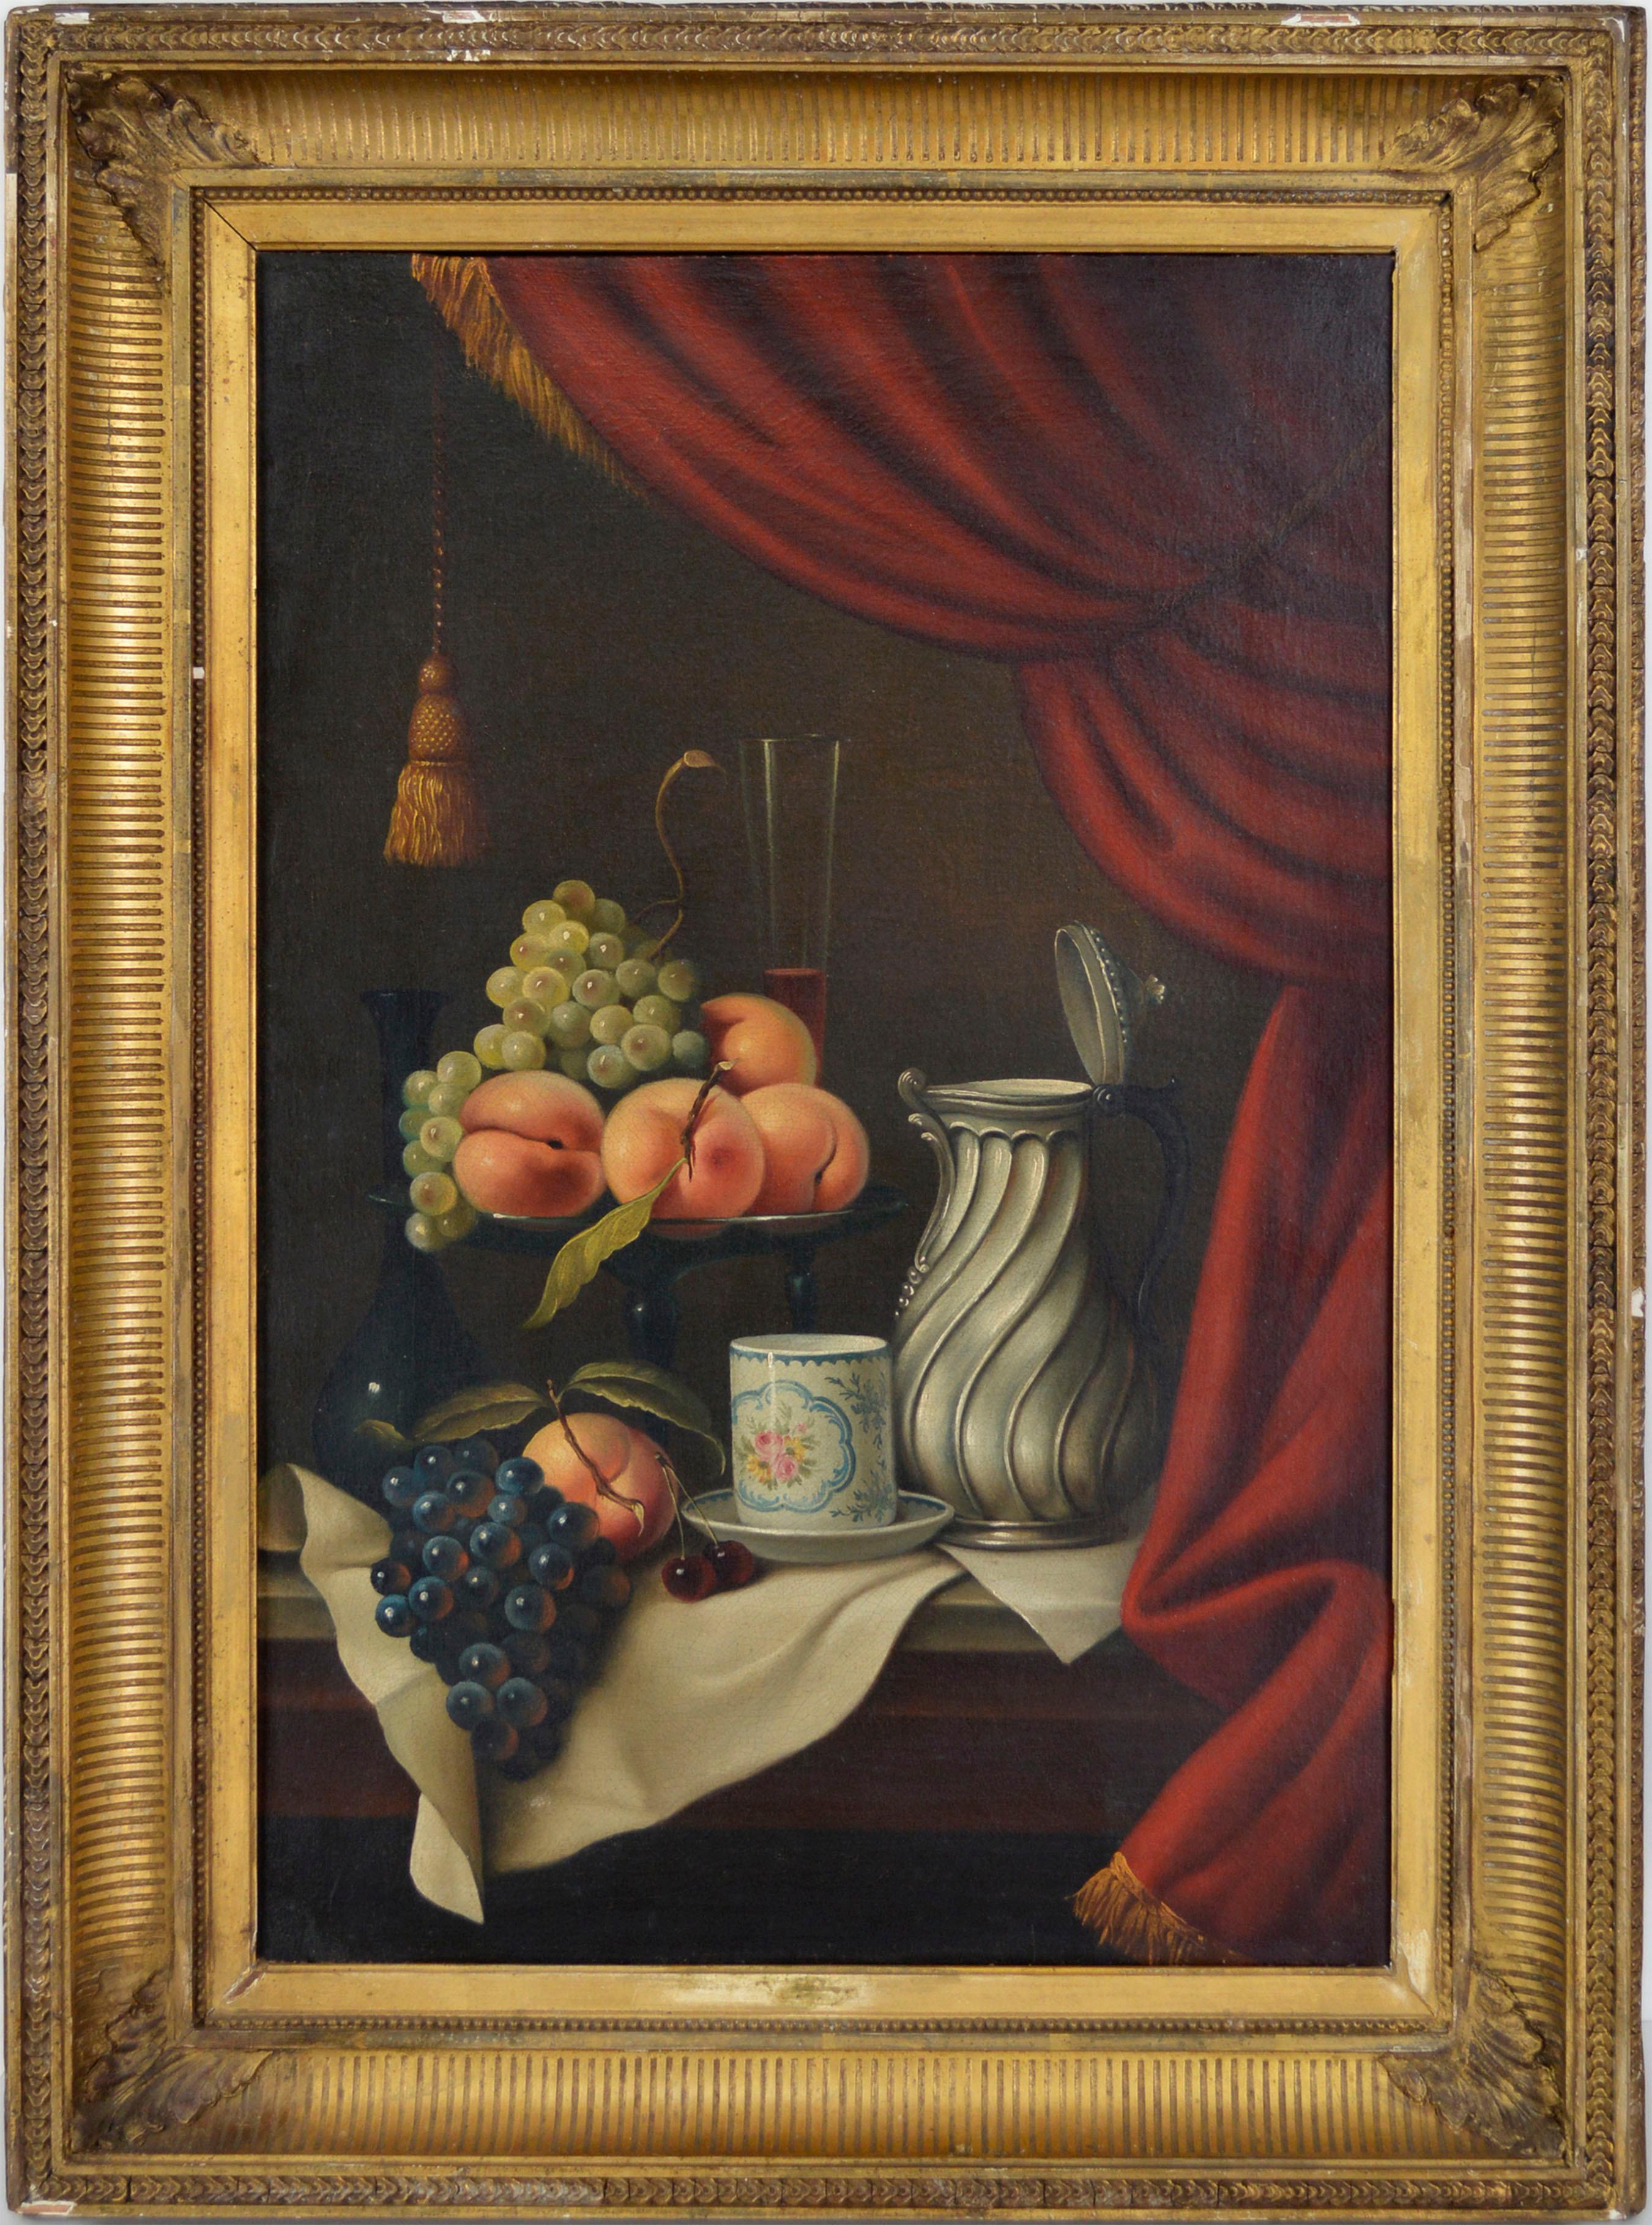 Unknown Interior Painting - Mid 19th Century Realist Fruit & Silver Pitcher Still-Life with Red Curtain 